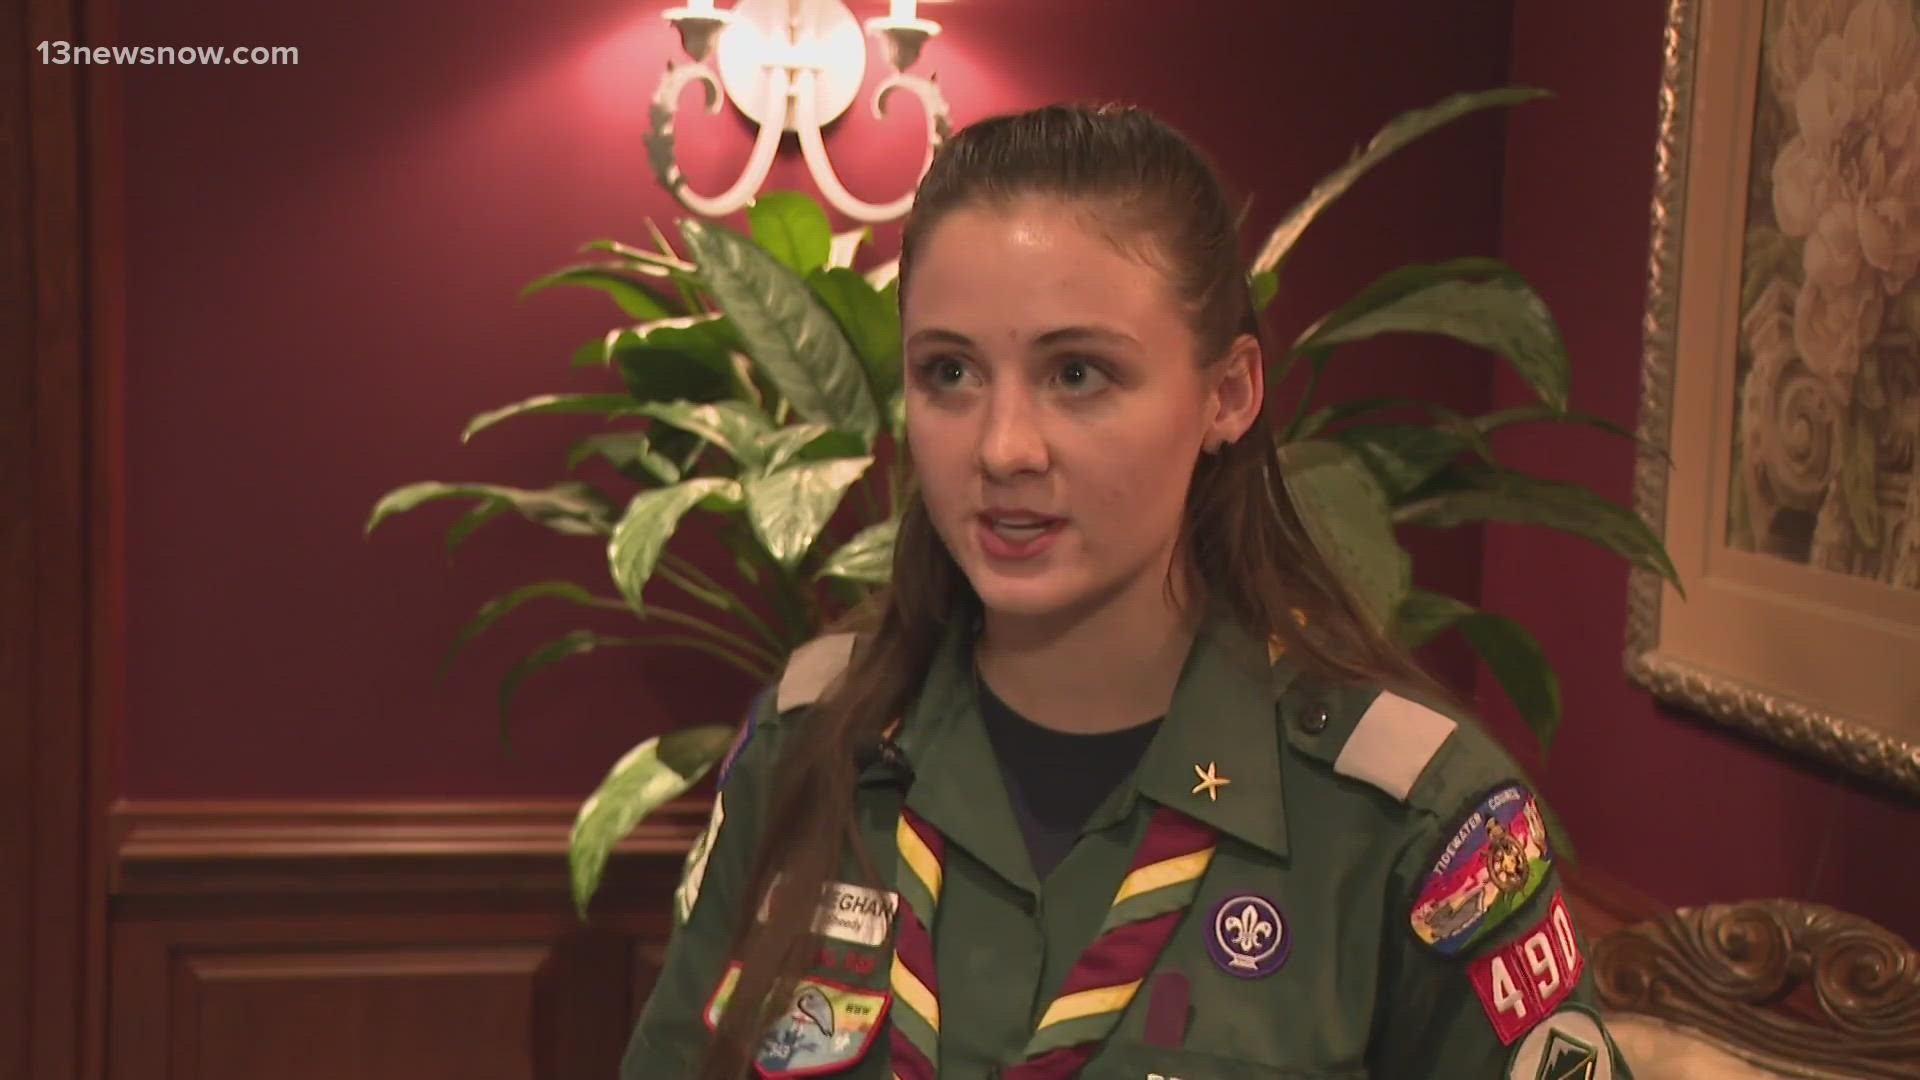 It's been a few years since girls have been allowed to join the "Boy Scouts of America".